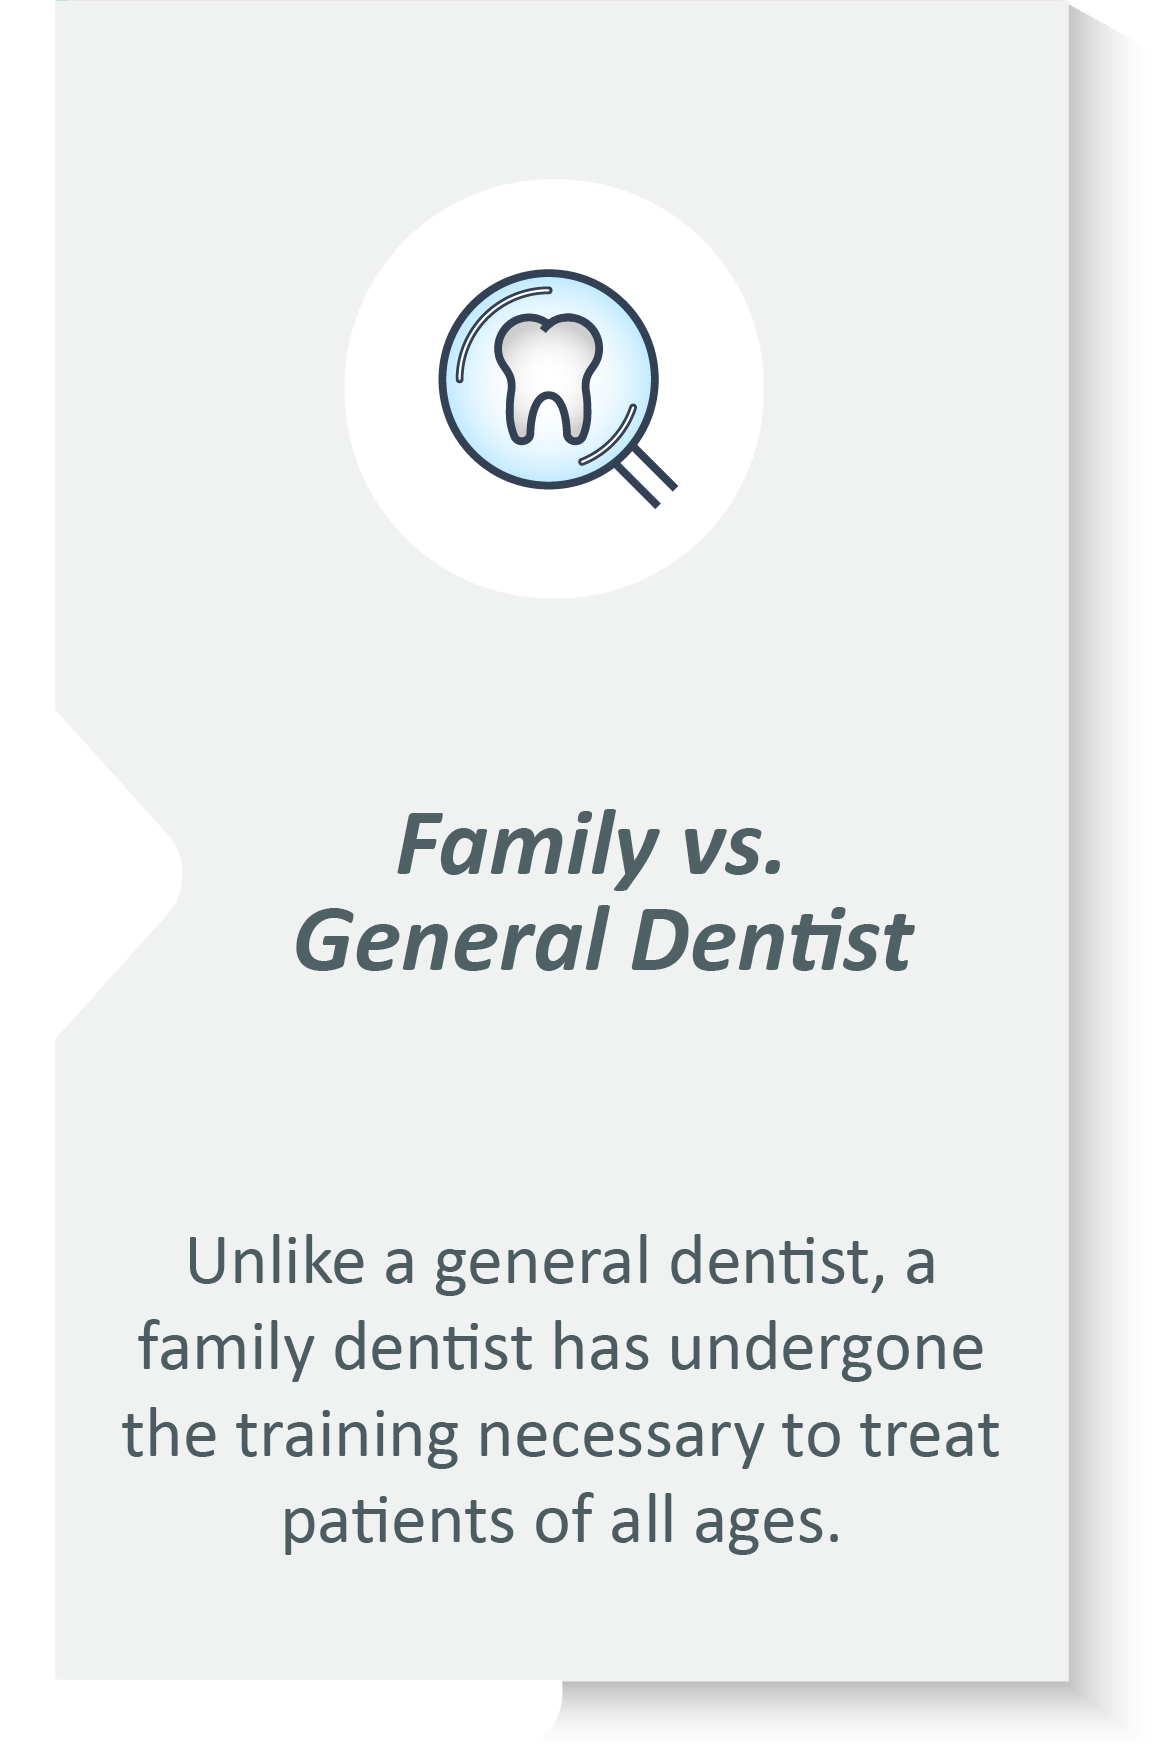 Family dentist infographic: Unlike a general dentist, a family dentist has undergone the training necessary to treat patients of all ages.